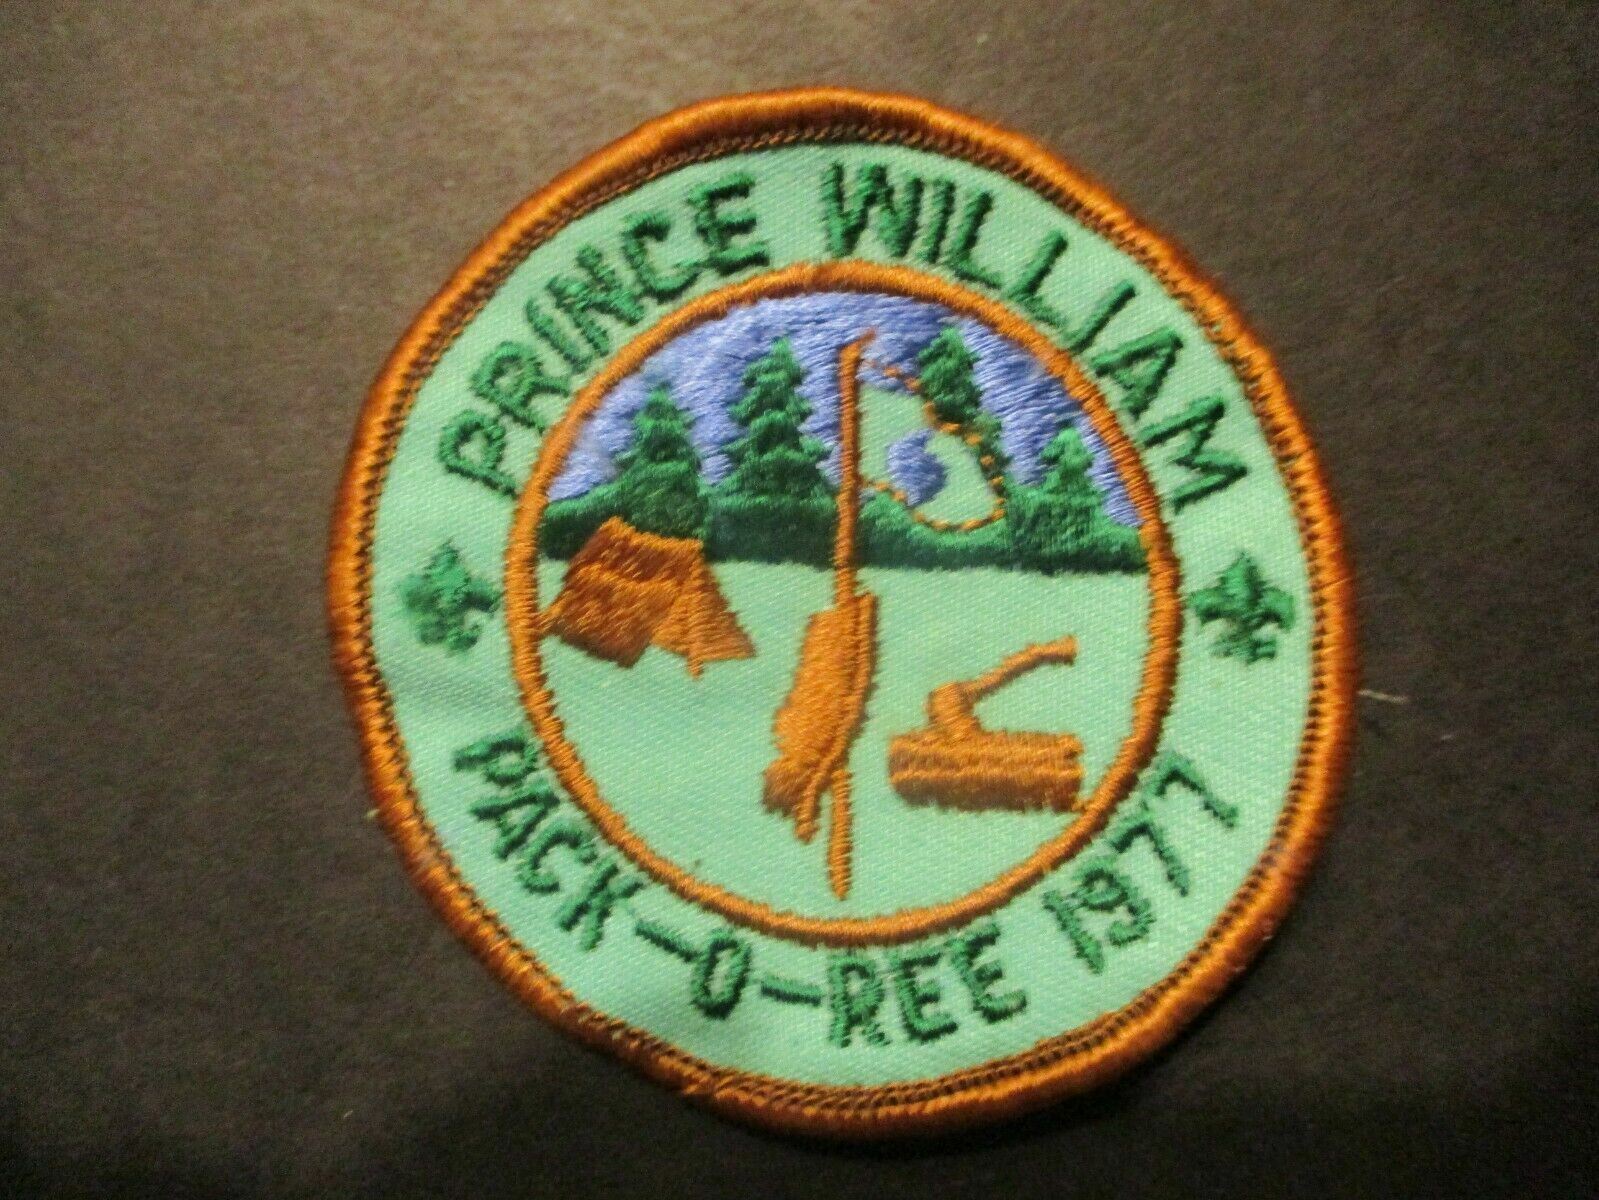 Prince William Pack-O-Ree 1977 3inch jacket patch